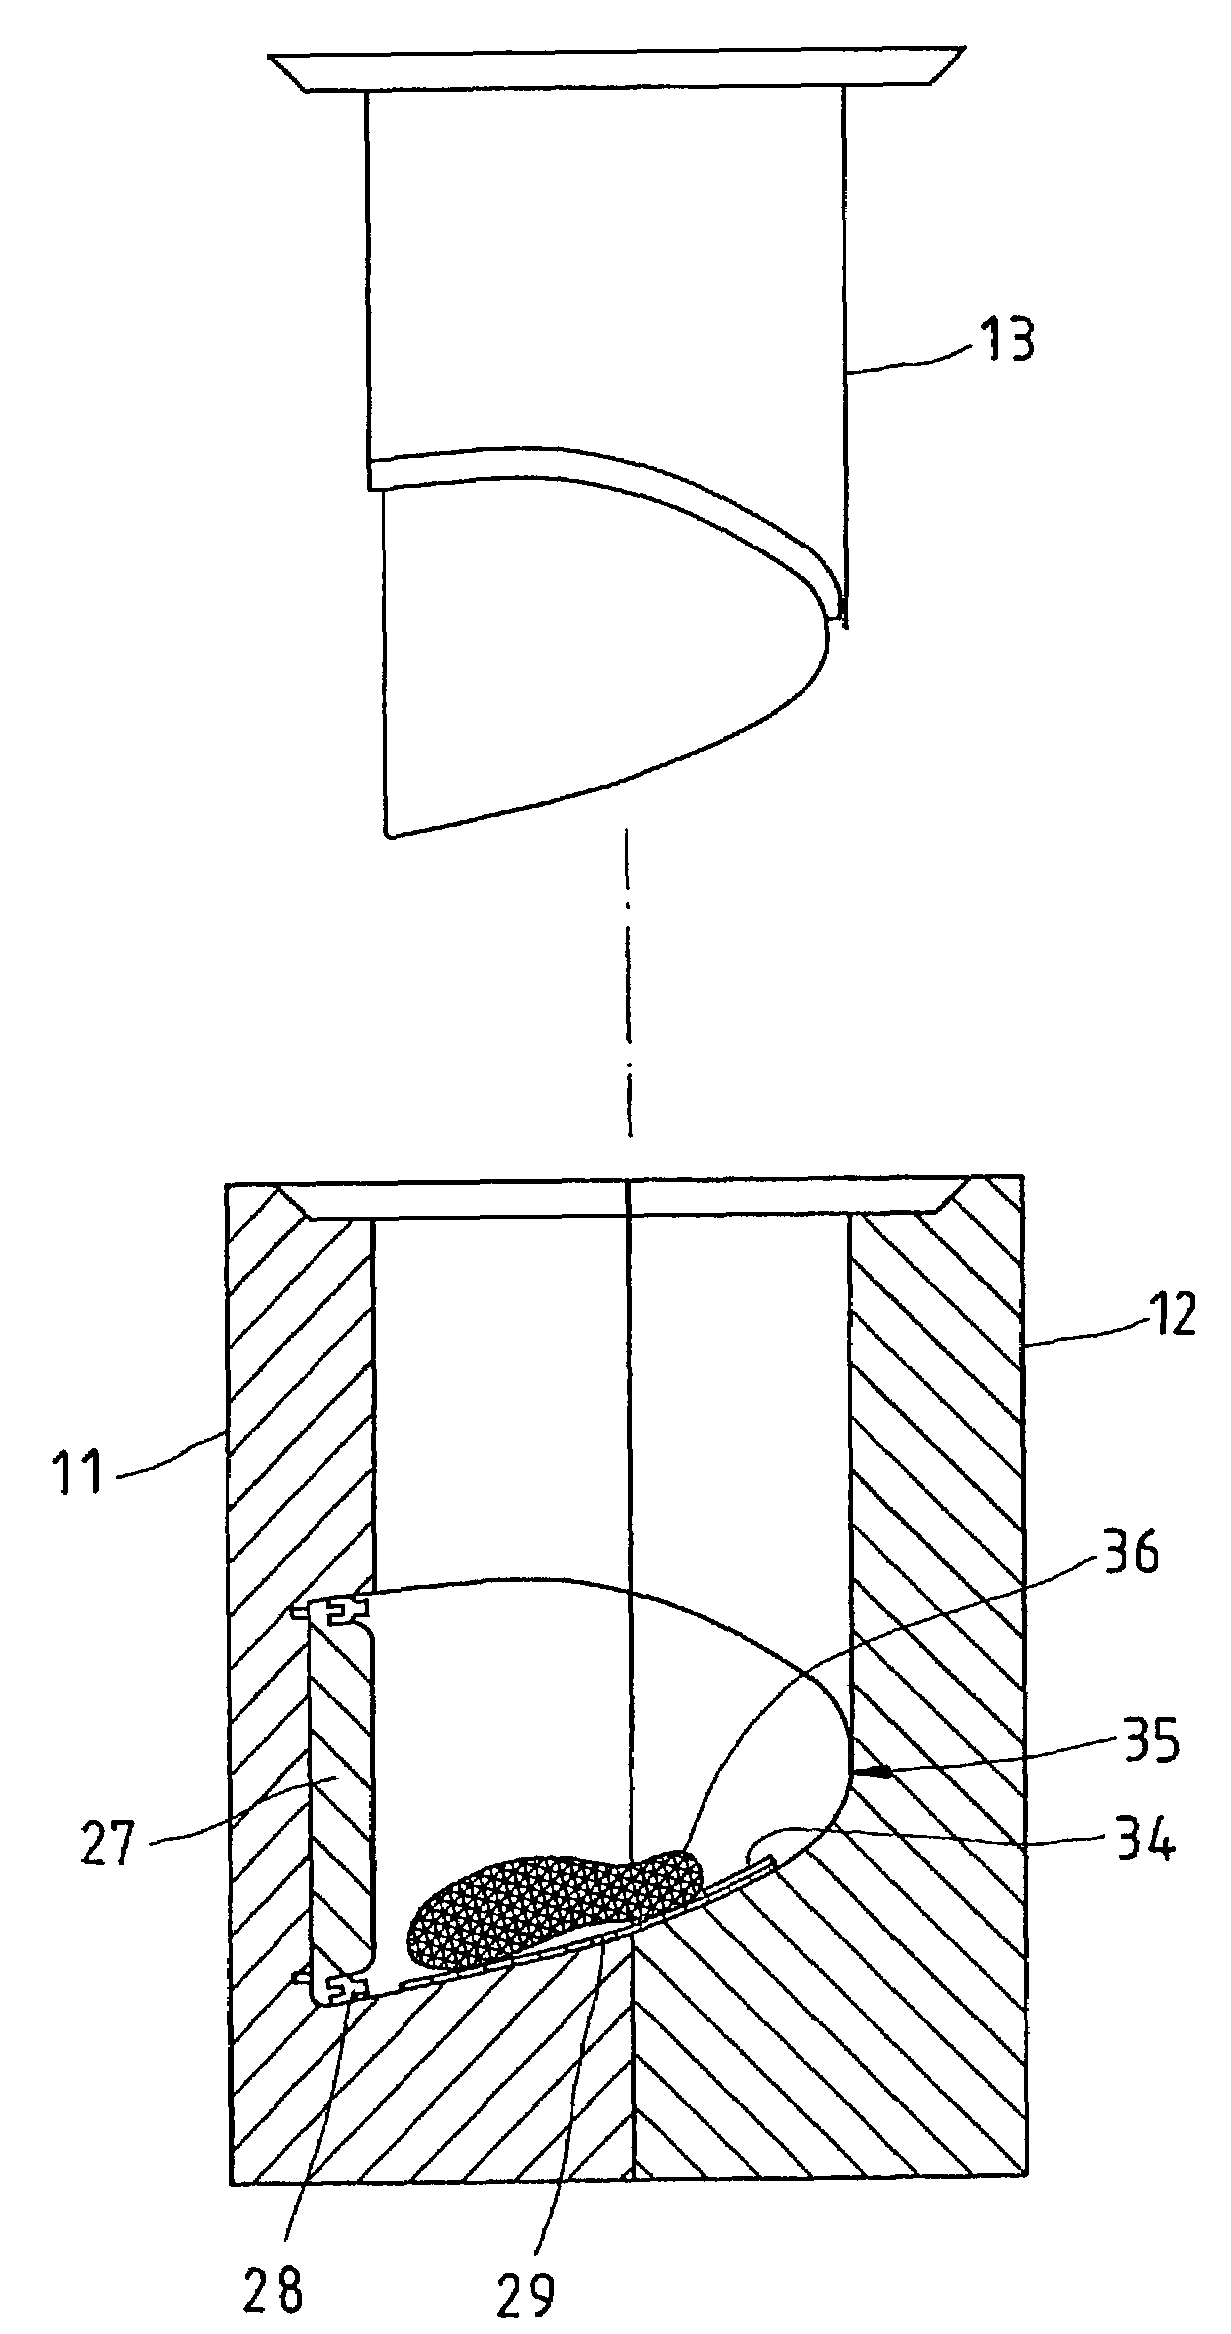 Method of manufacturing composite wood golf club head with metal face